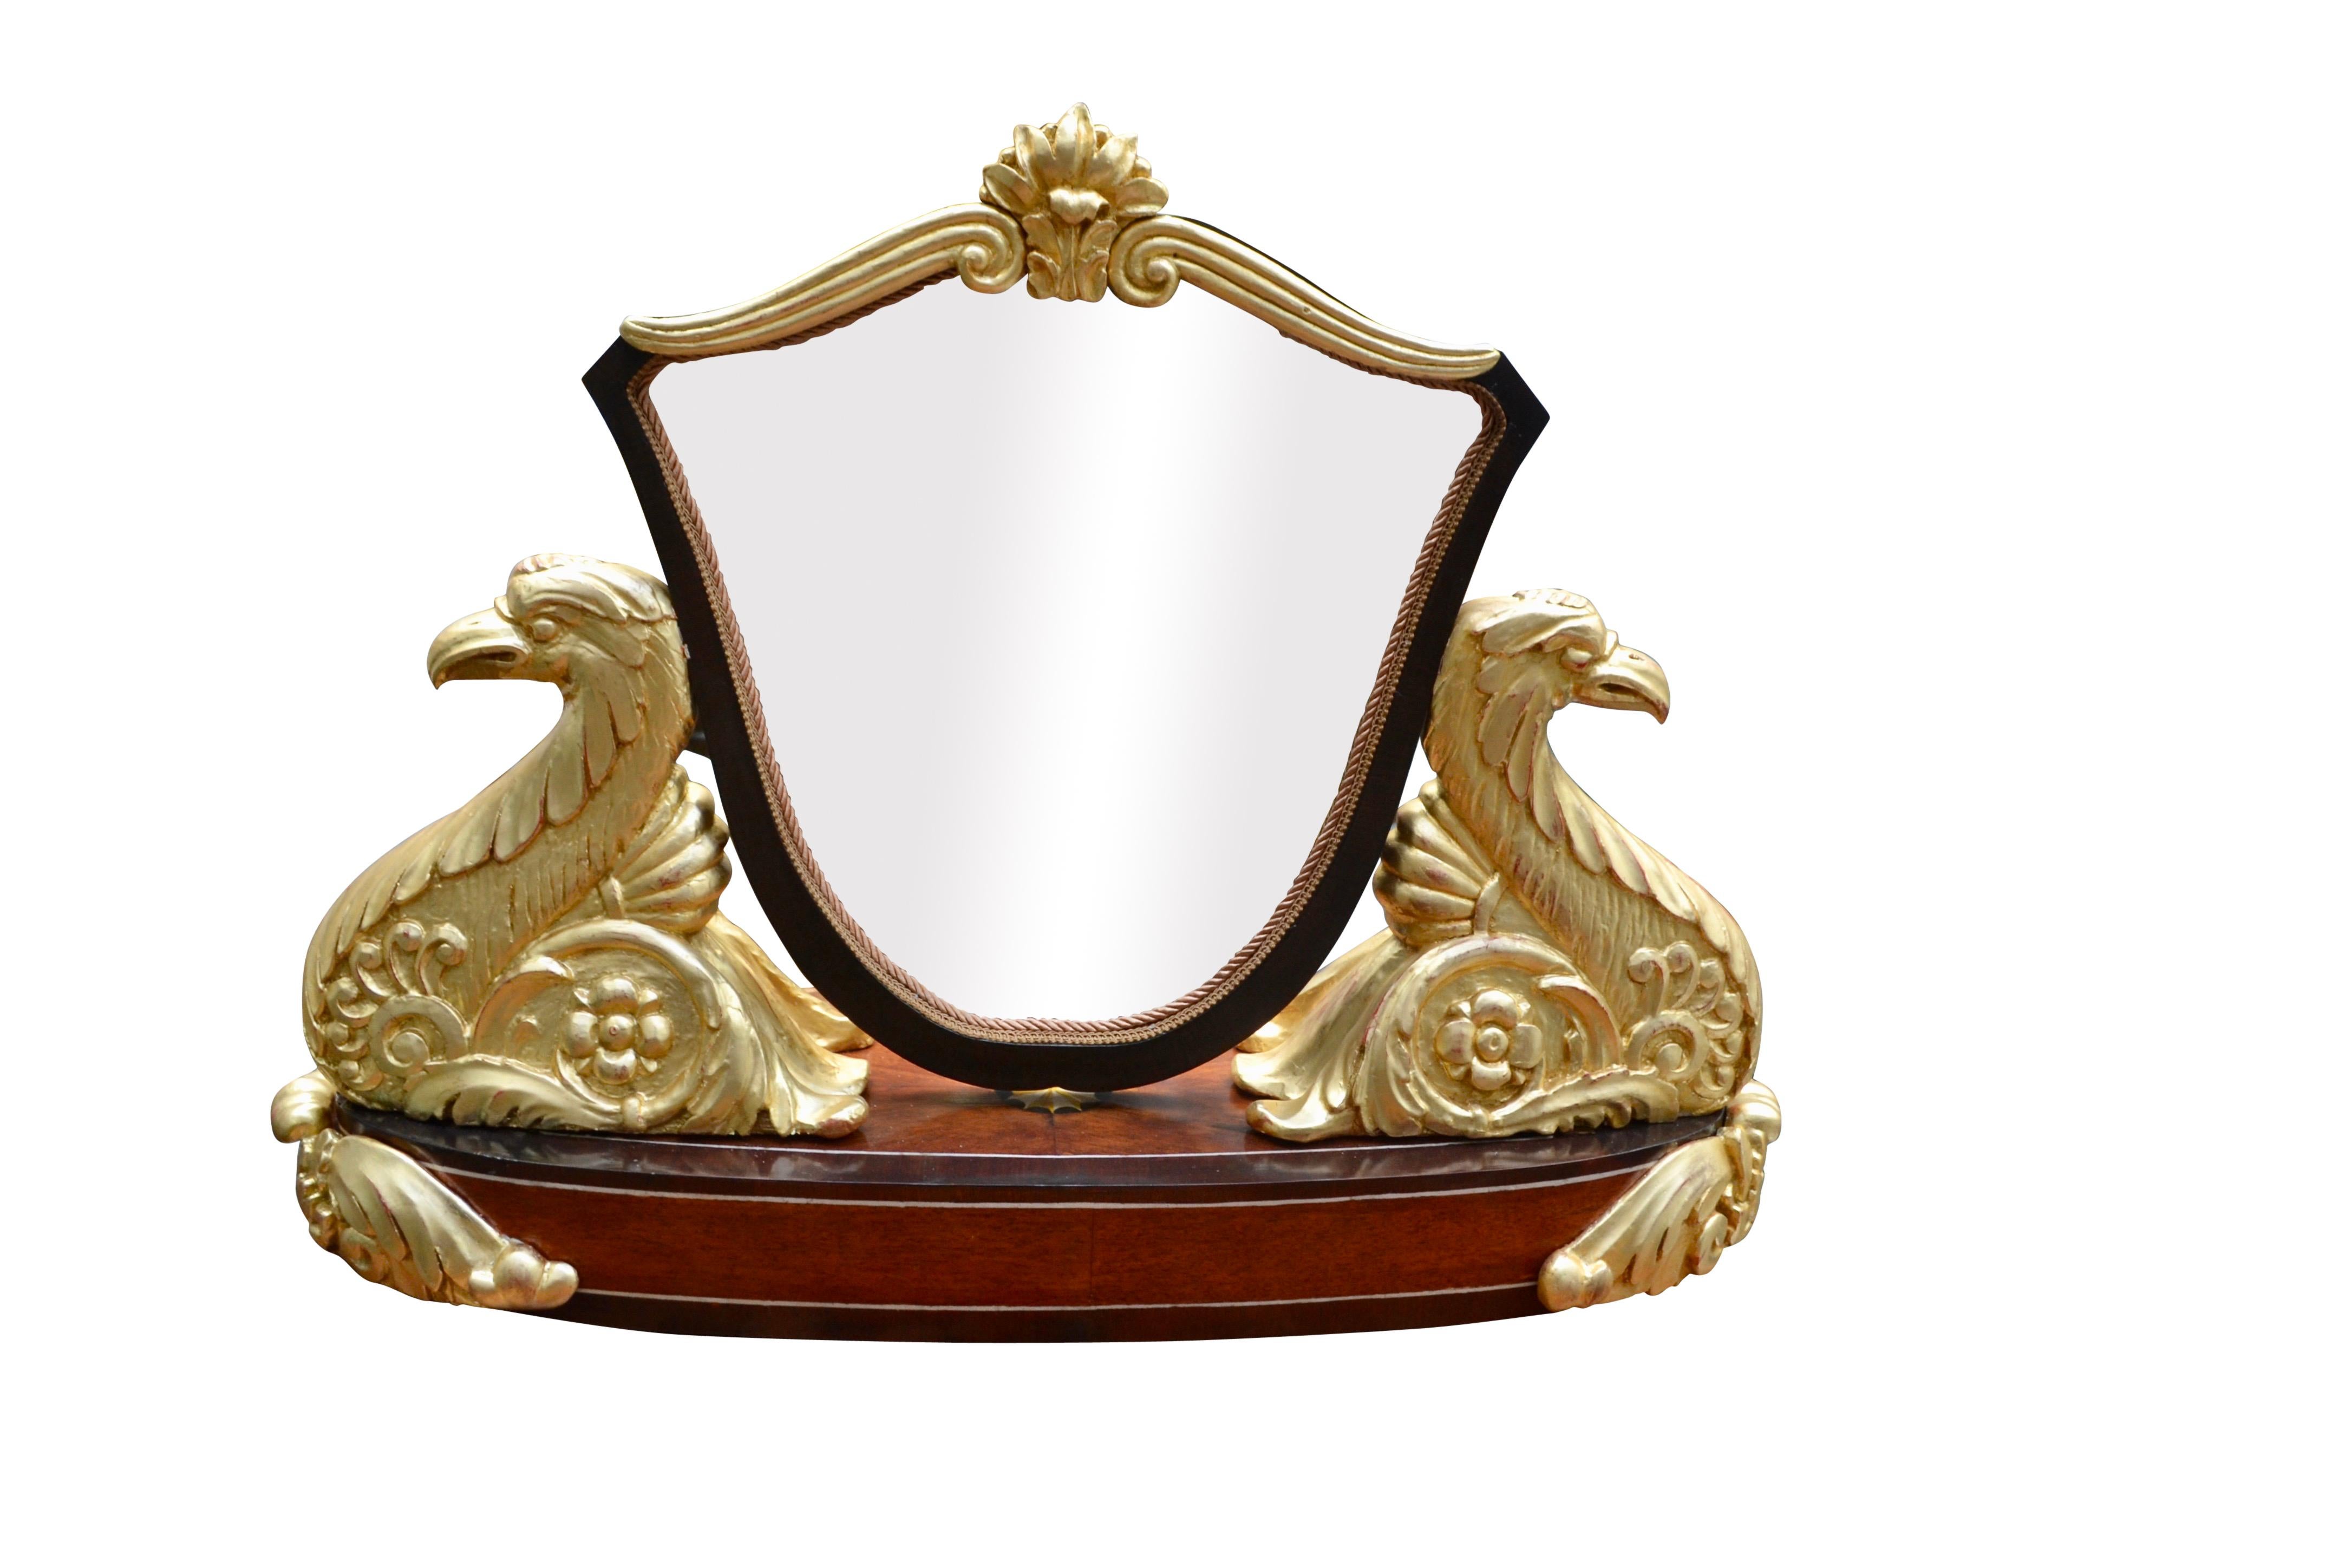 A very handsome and unusual table top dressing mirror likely made in Austria in the early to mid 19thC. The shield shaped mirror has a gilded cartouche on the top with the mirror held in place by large carved and gilded eagle/swans on each side of